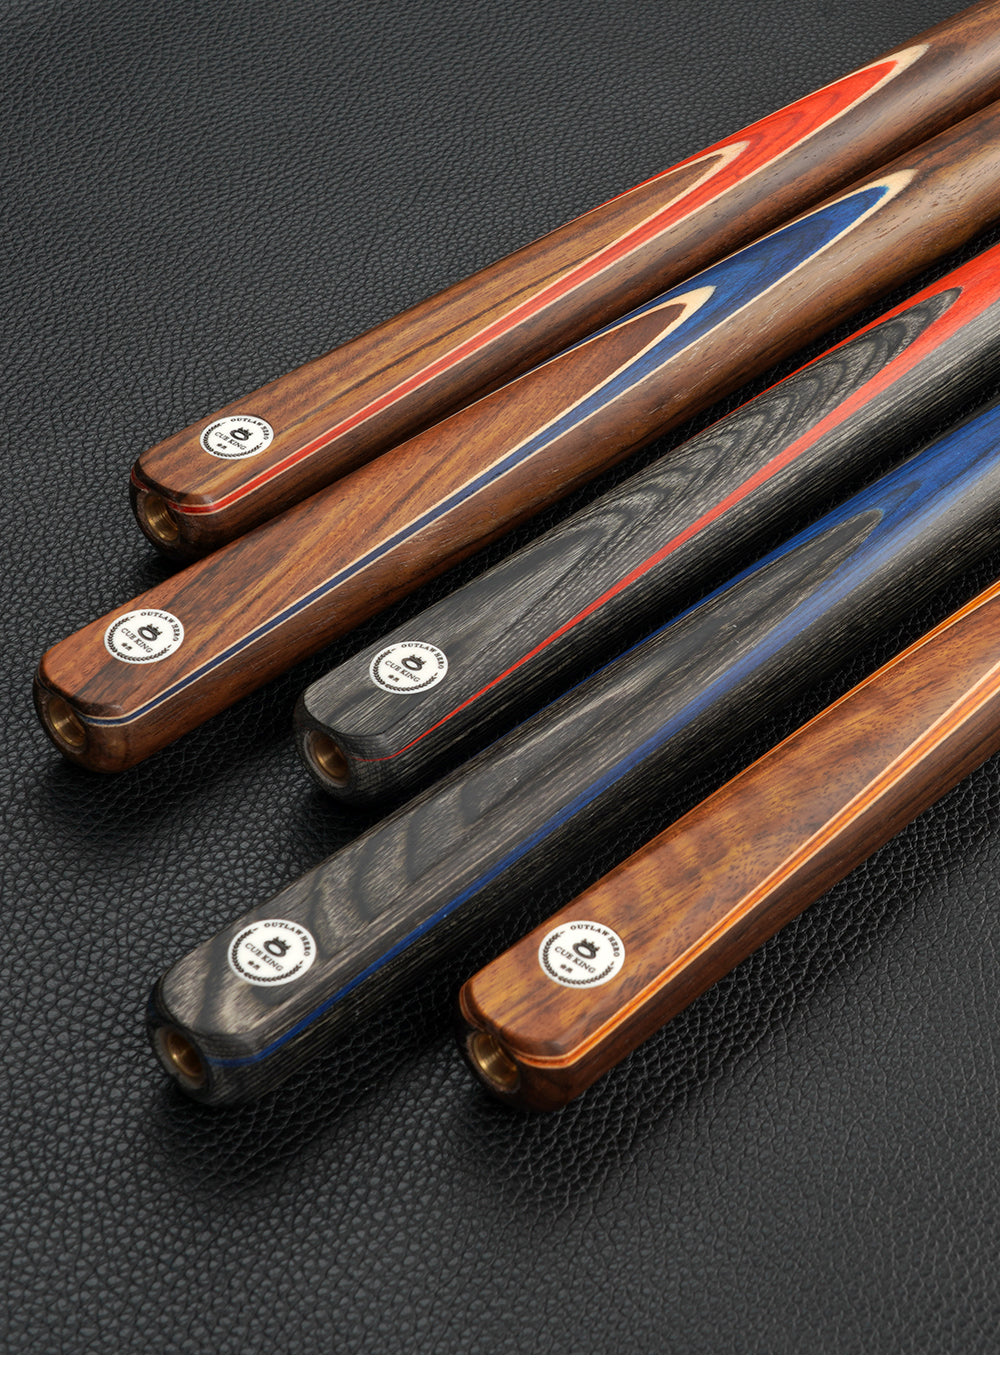 O'MIN Member Snooker Cue 3/4 Jointed Cue 57 inch 10-10.2mm Ash Cue OMIN Members Snooker Stick Billiard Cue With Case and Extension Kit